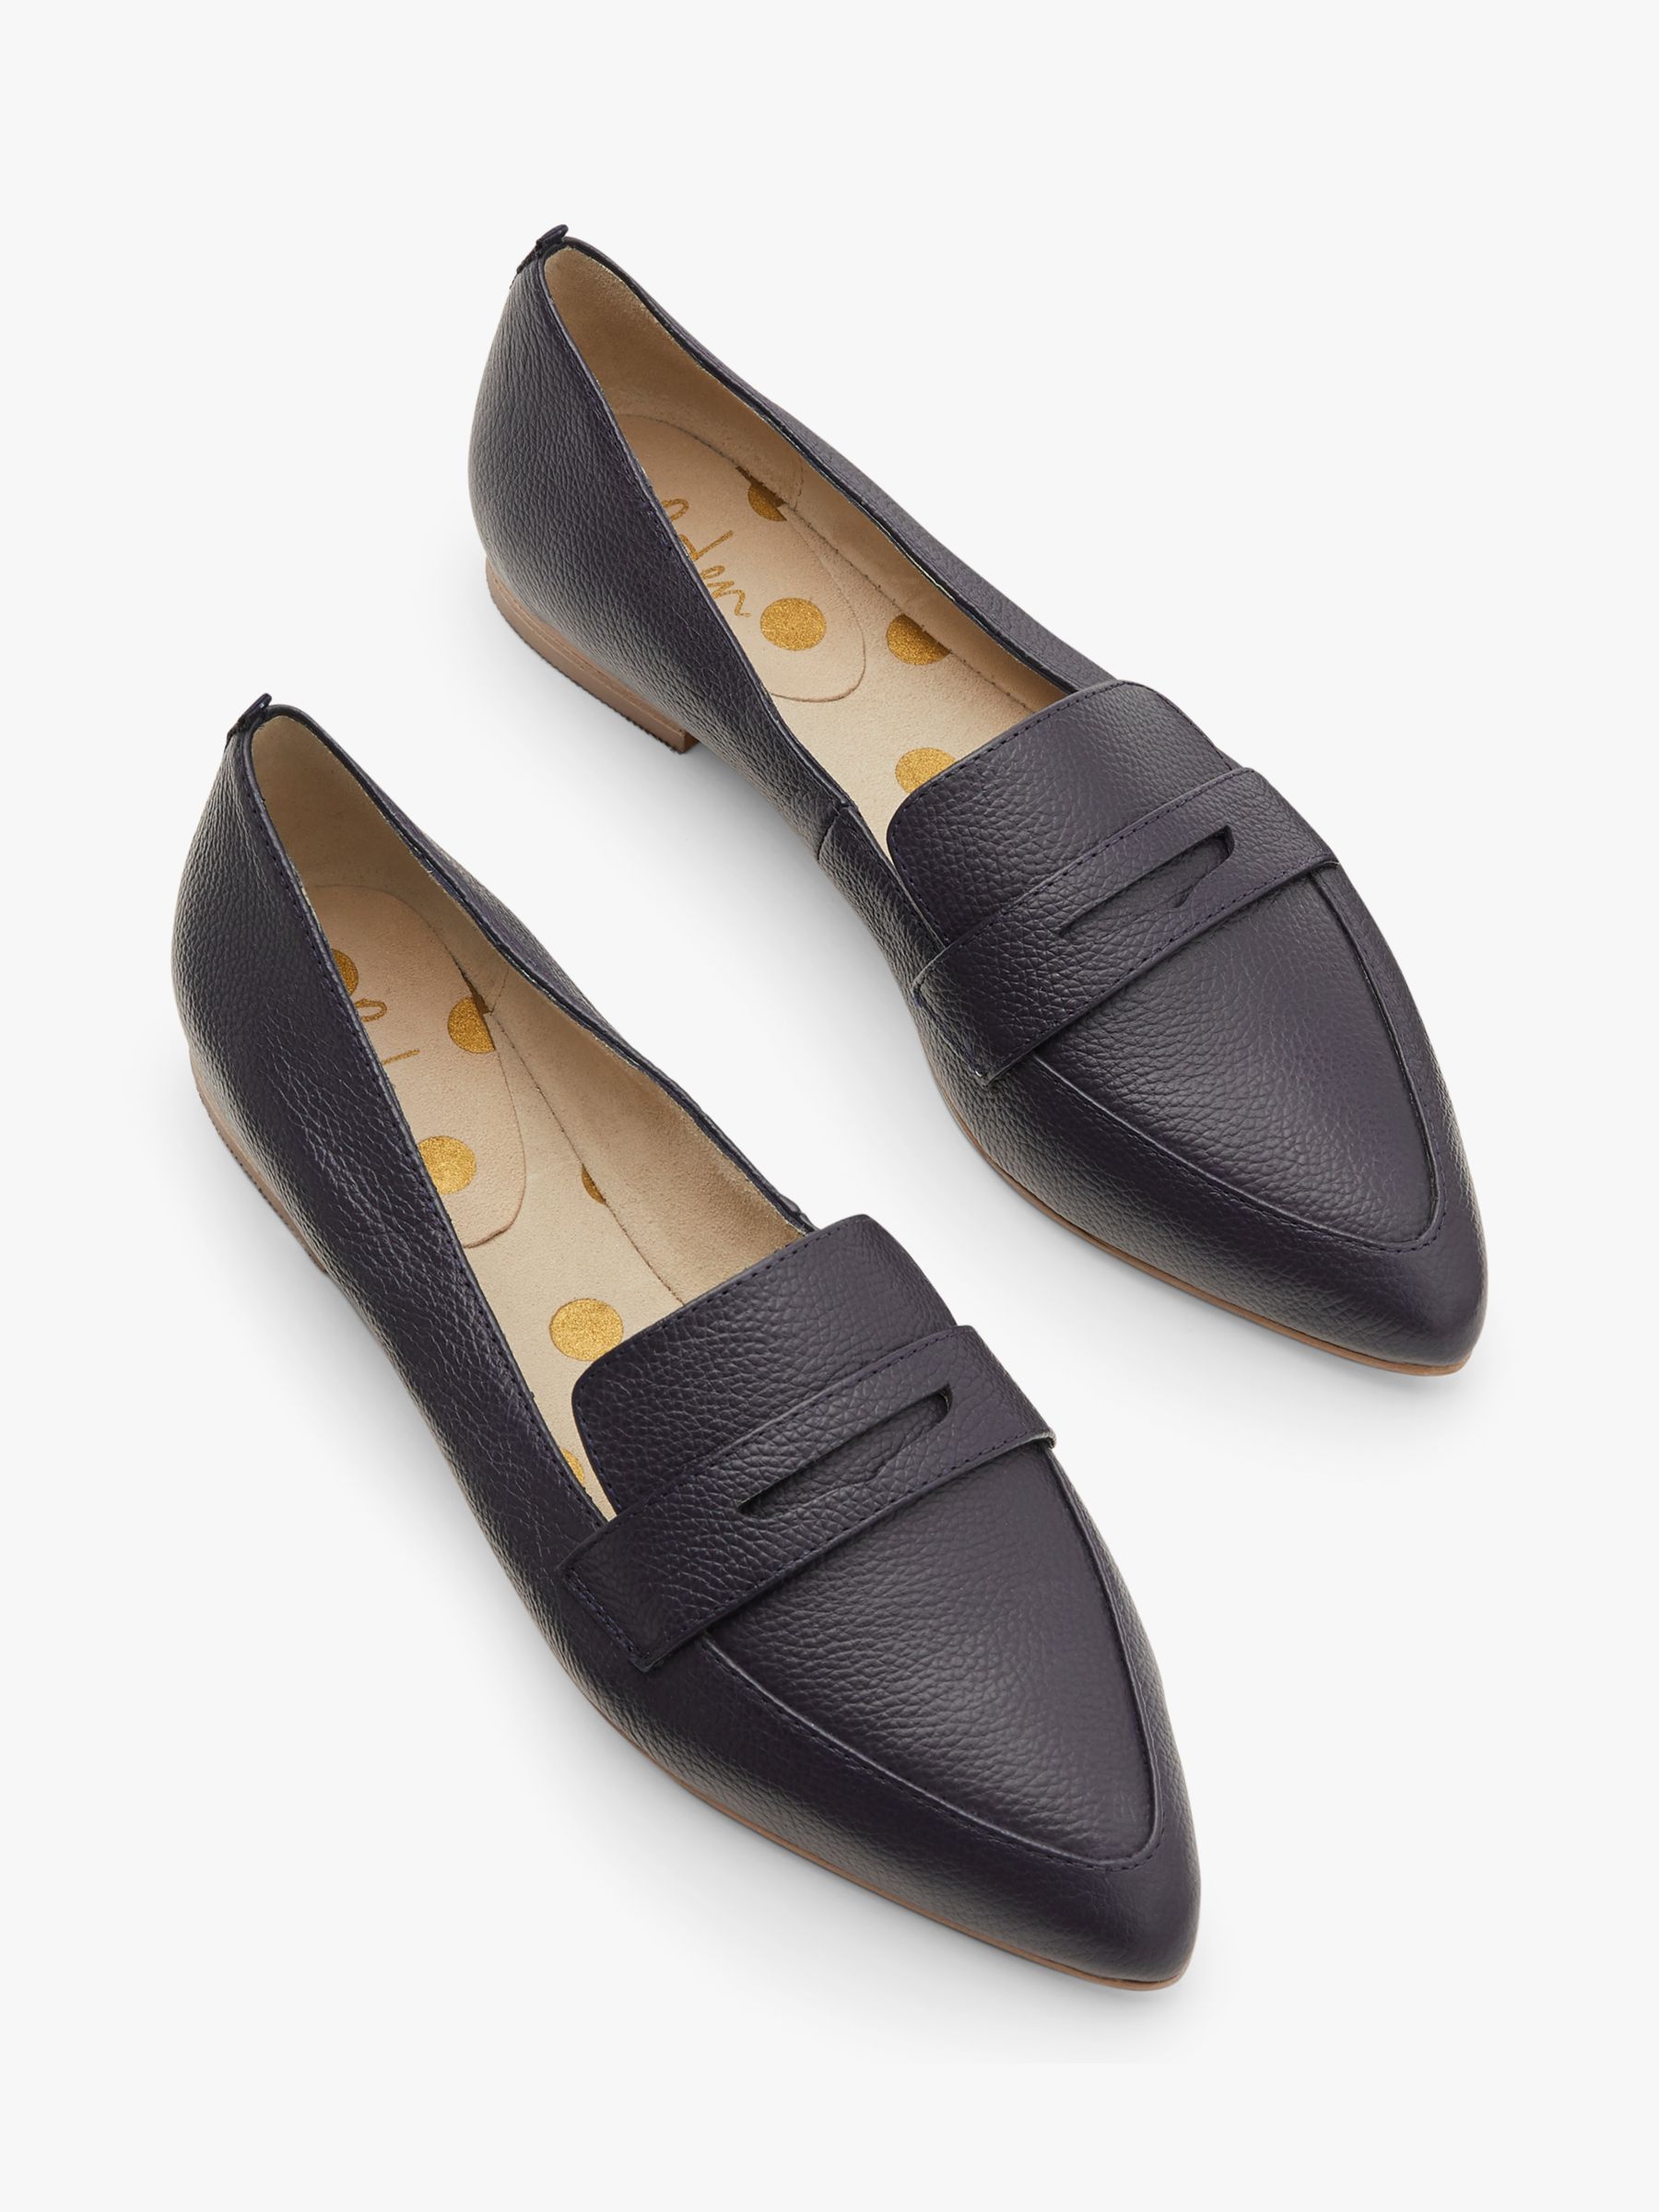 Boden Flexible Sole Leather Penny Loafers, Navy at John Lewis & Partners